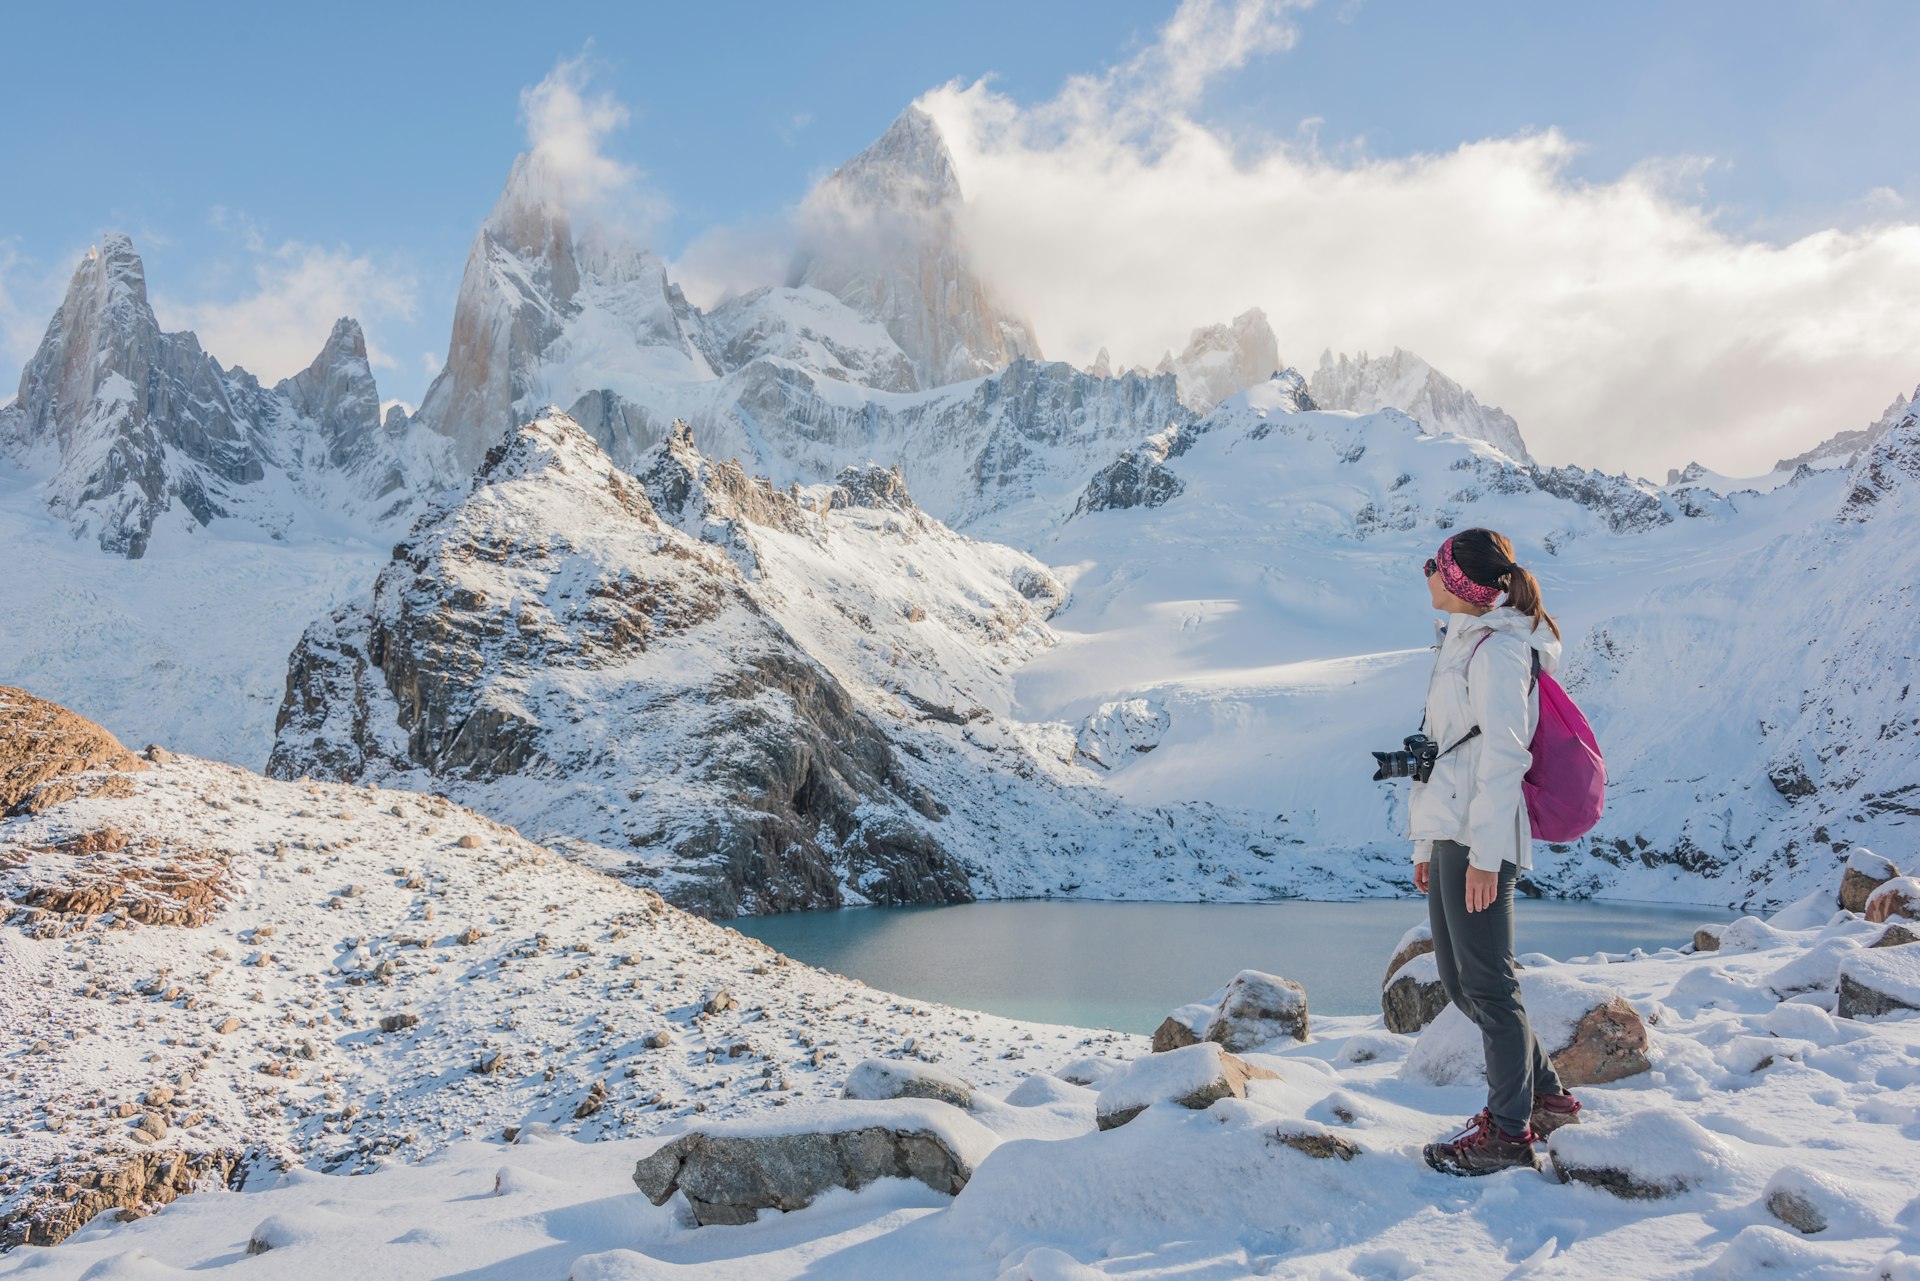 A woman in hiking gear admires the view of a snow-covered mountain range with several distinct jagged peaks